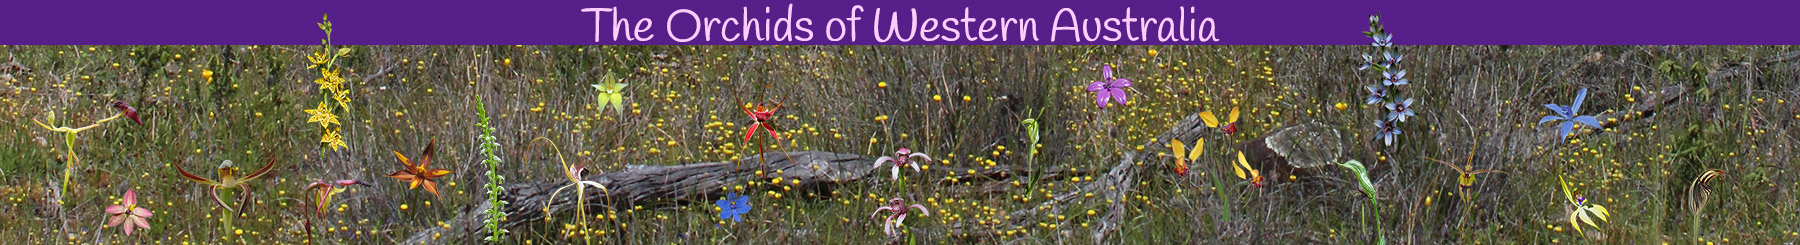 The Orchids of Western Australia